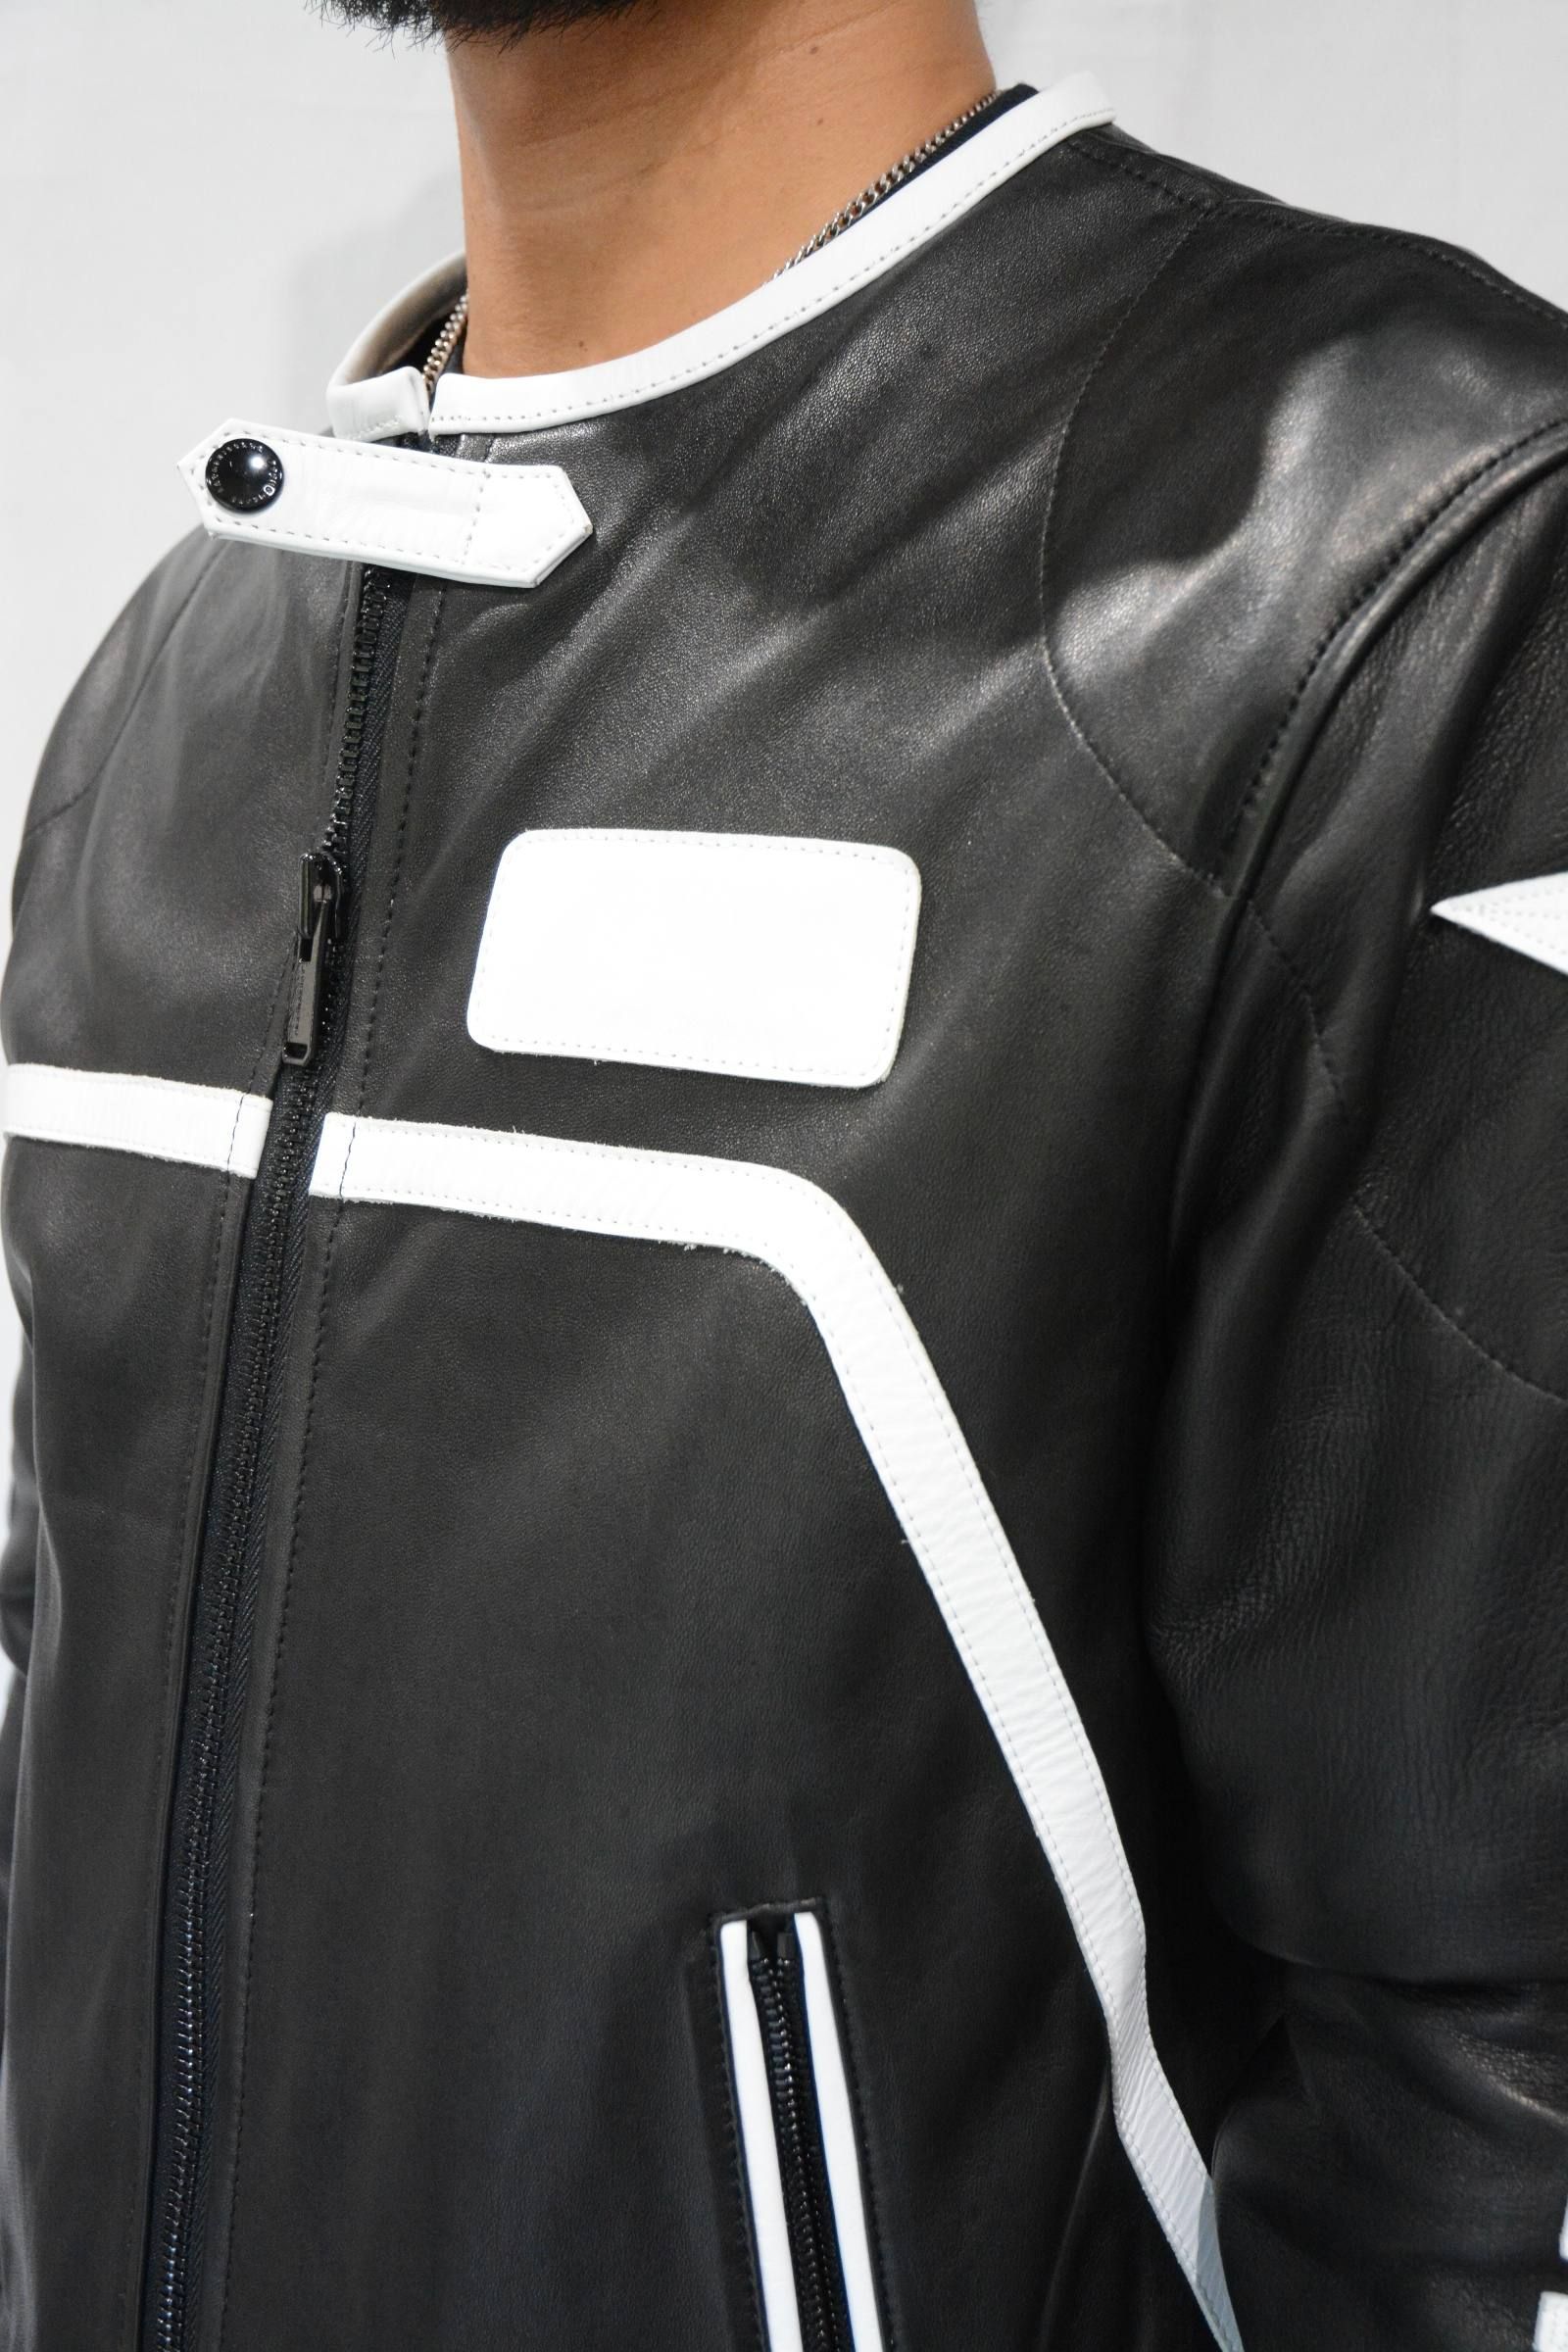 FORSOMEONE   RACING RIDERS JACKET BK/WH   chord online store